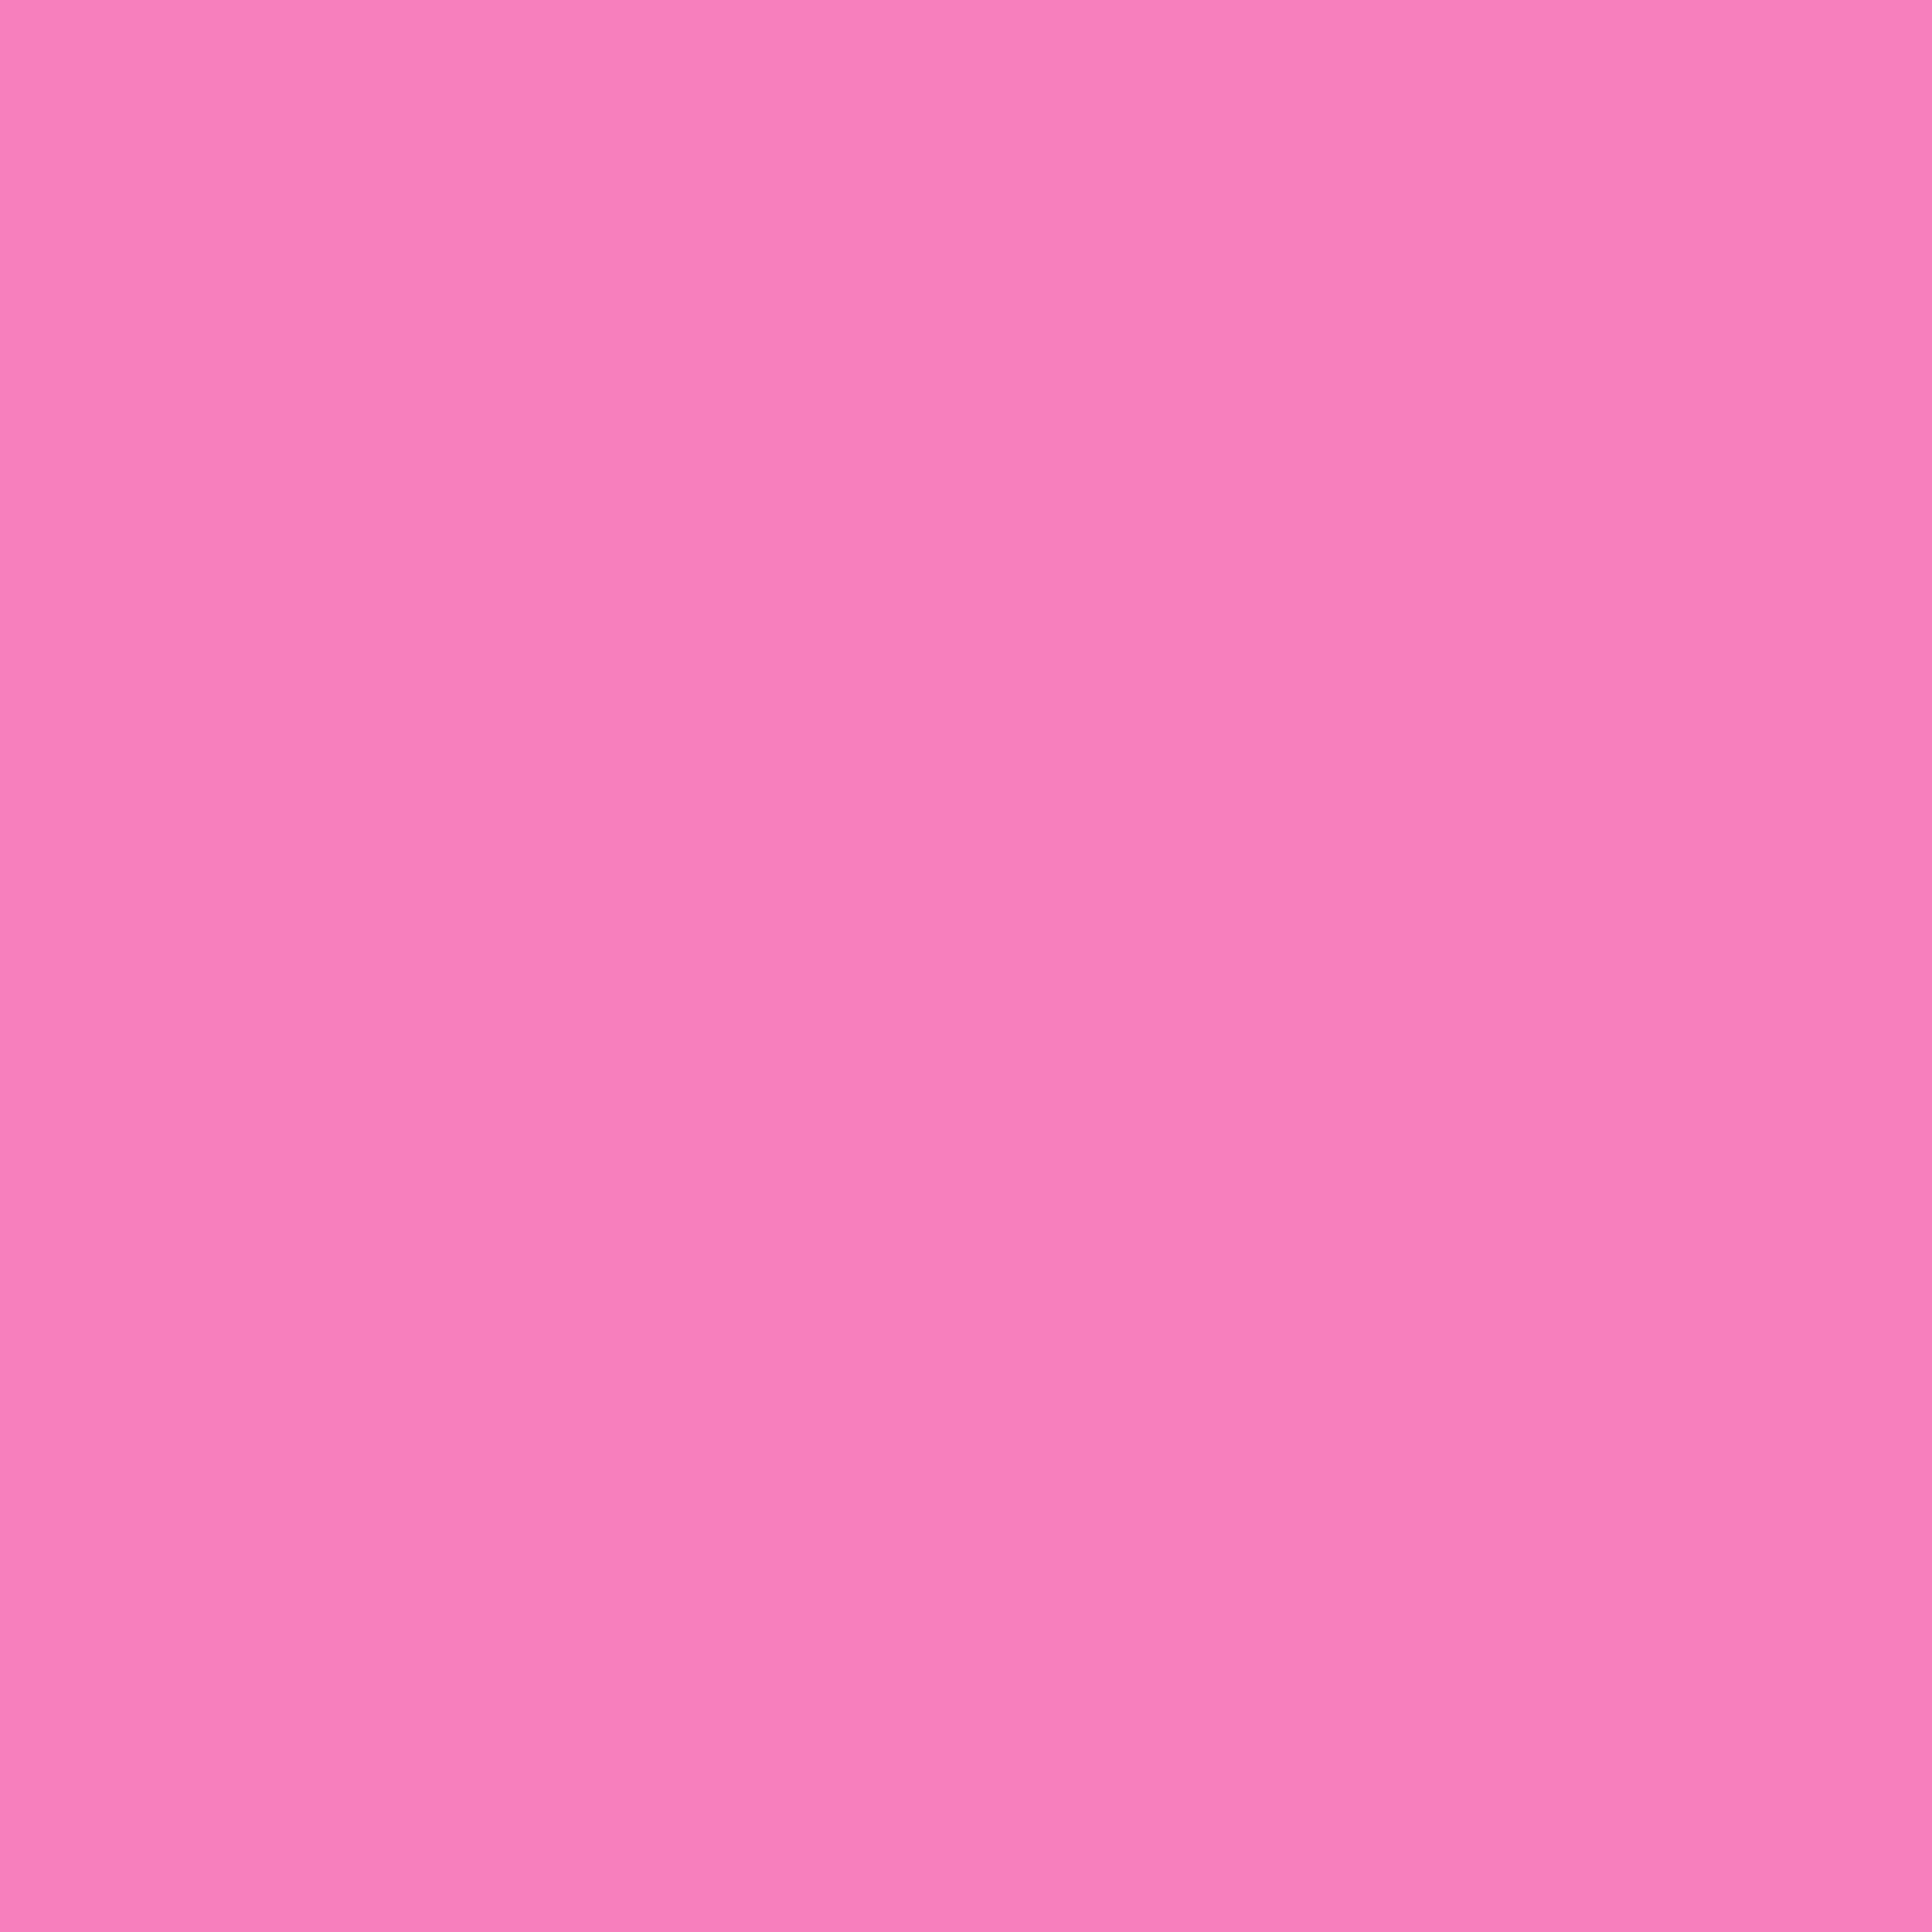 2732x2732 Persian Pink Solid Color Background